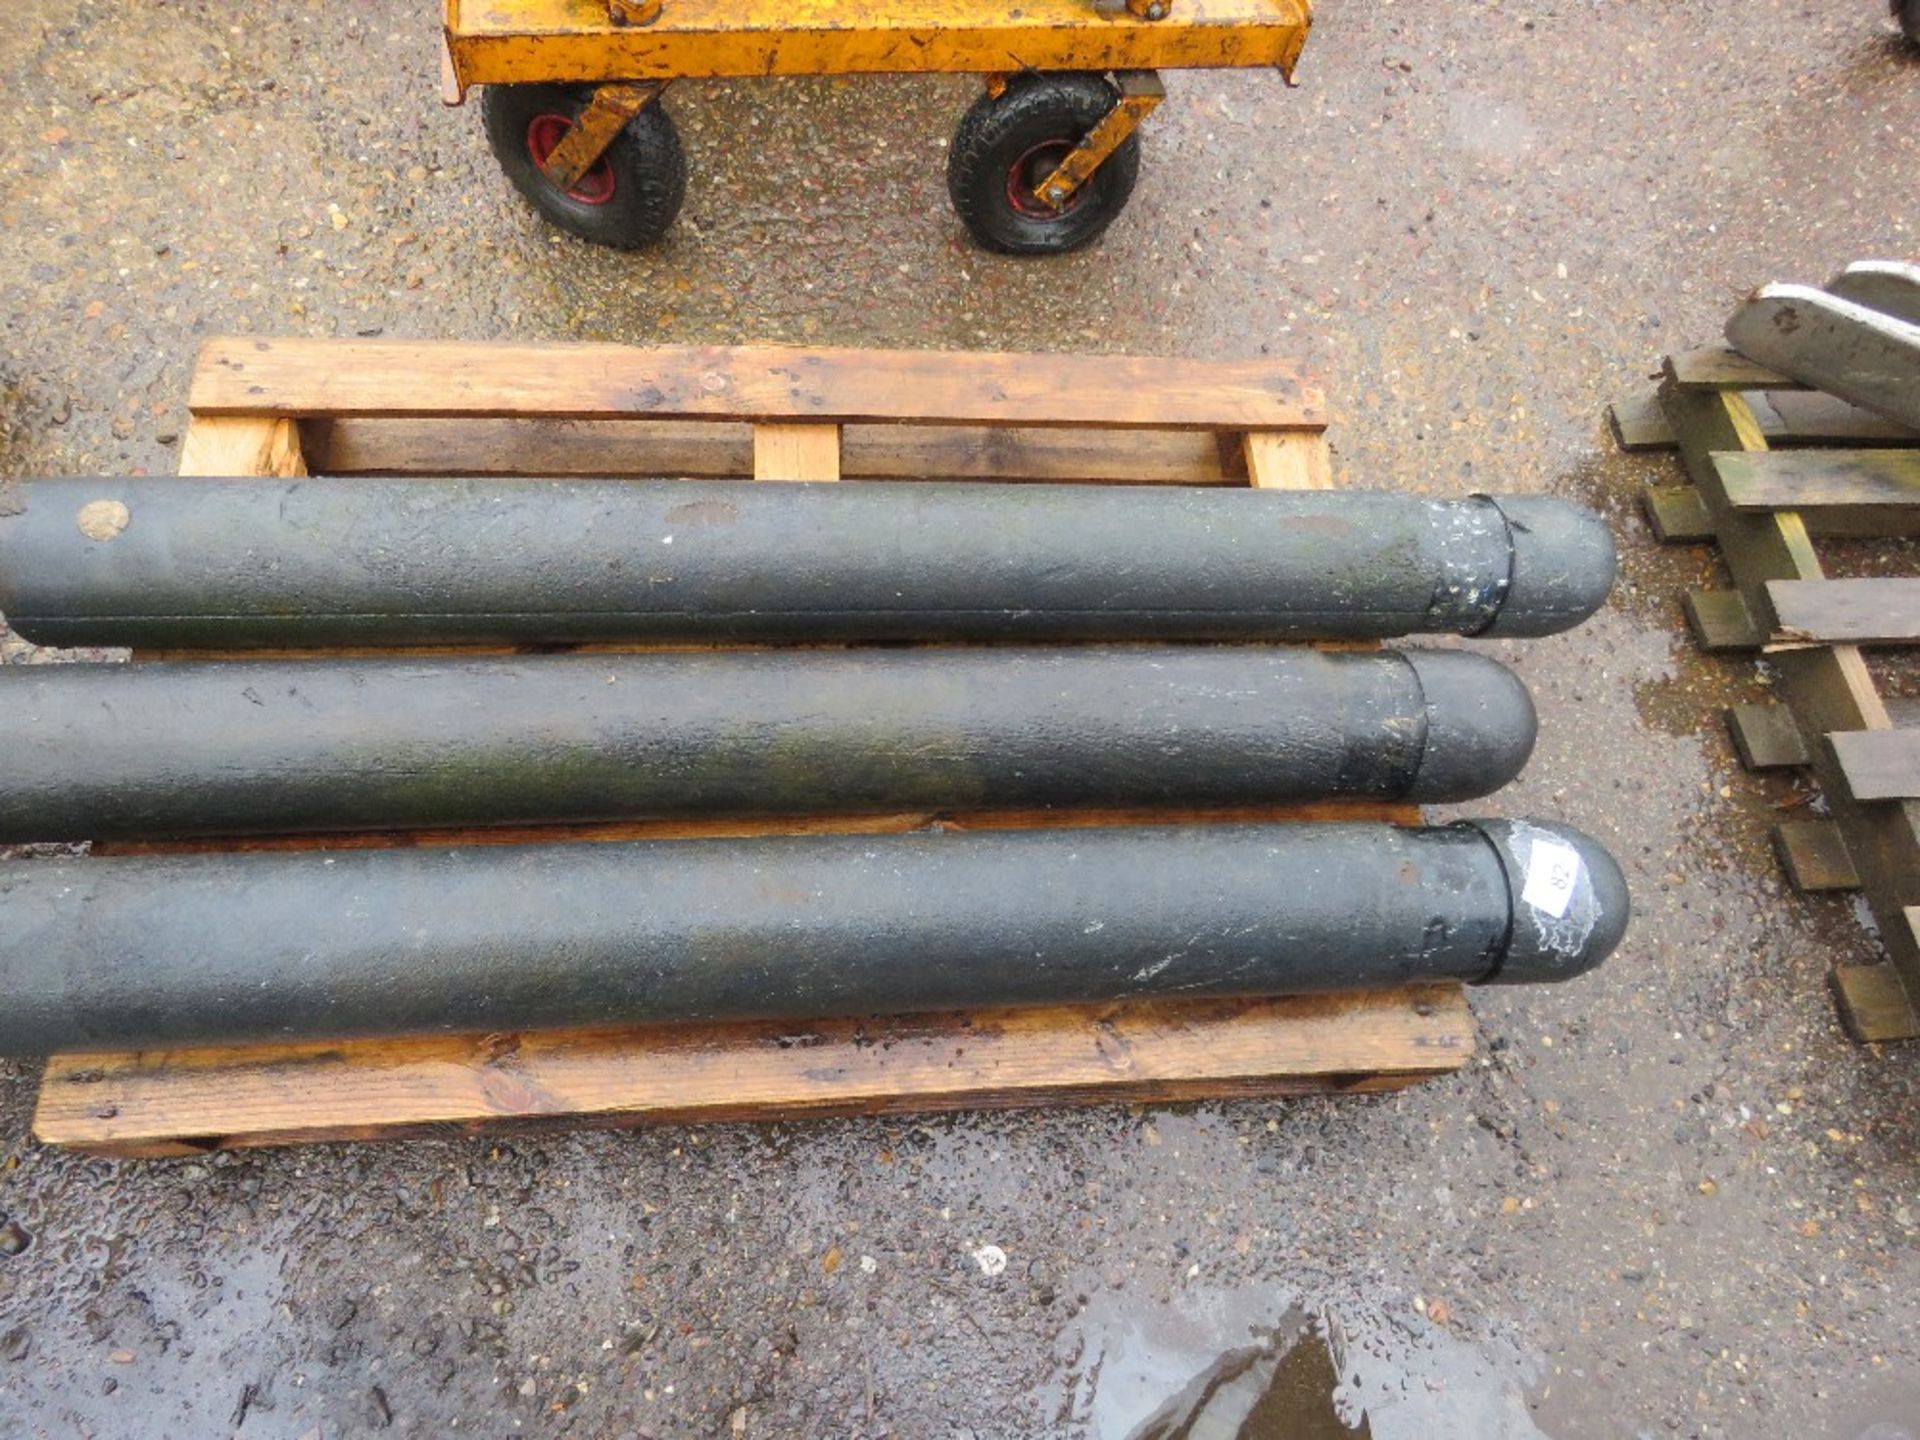 3NO LARGE PLASTIC BOLLARDS.....THIS LOT IS SOLD UNDER THE AUCTIONEERS MARGIN SCHEME, THEREFORE NO VA